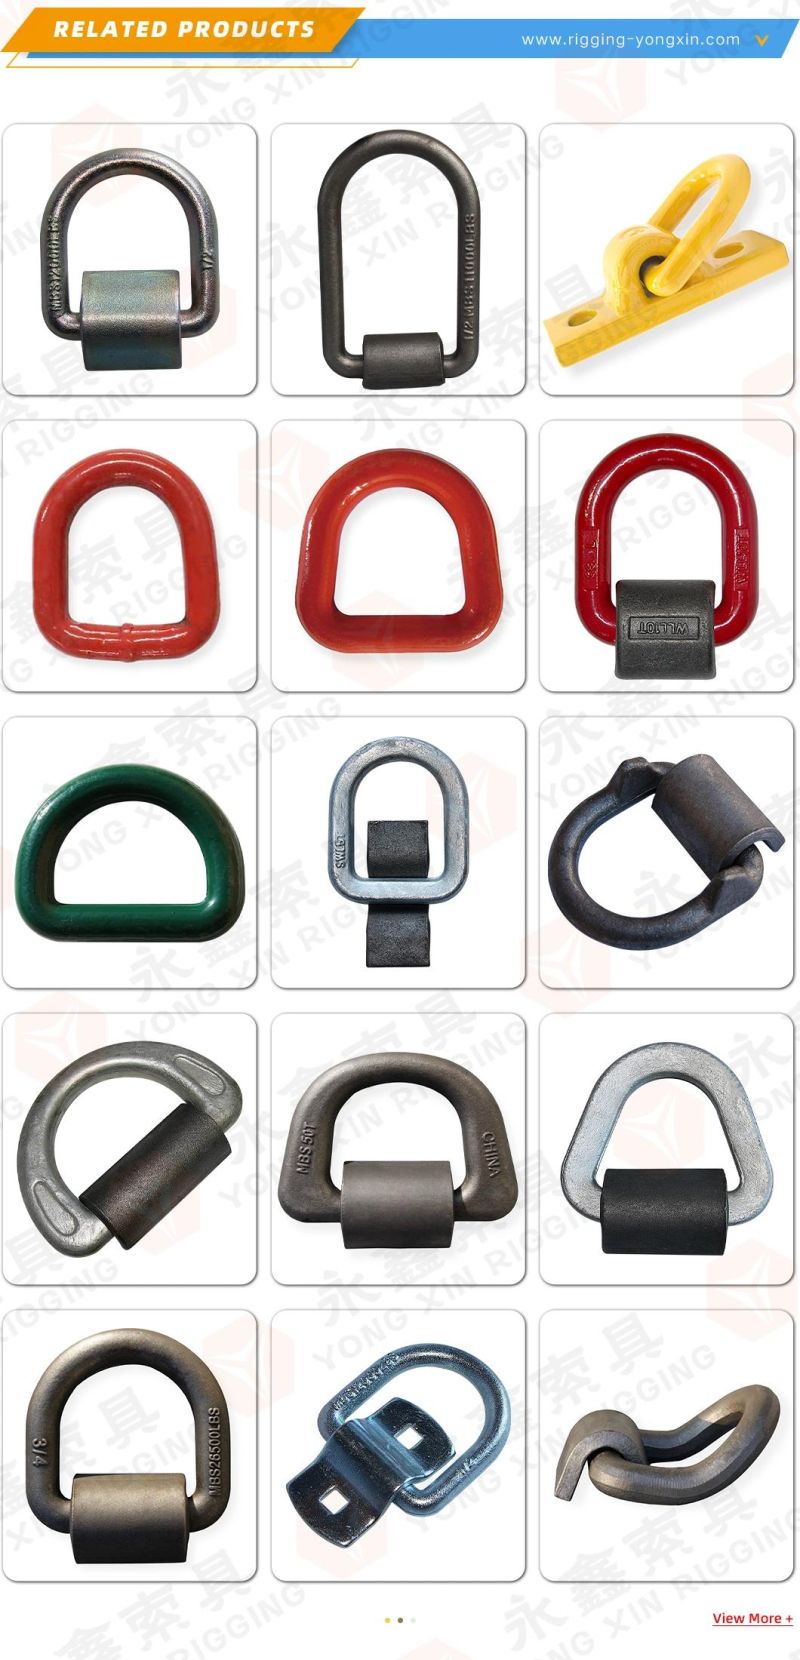 Steel Forged Lashing D Ring with Wrap Welded on Bracket for Chain Link|Lashing D Ring